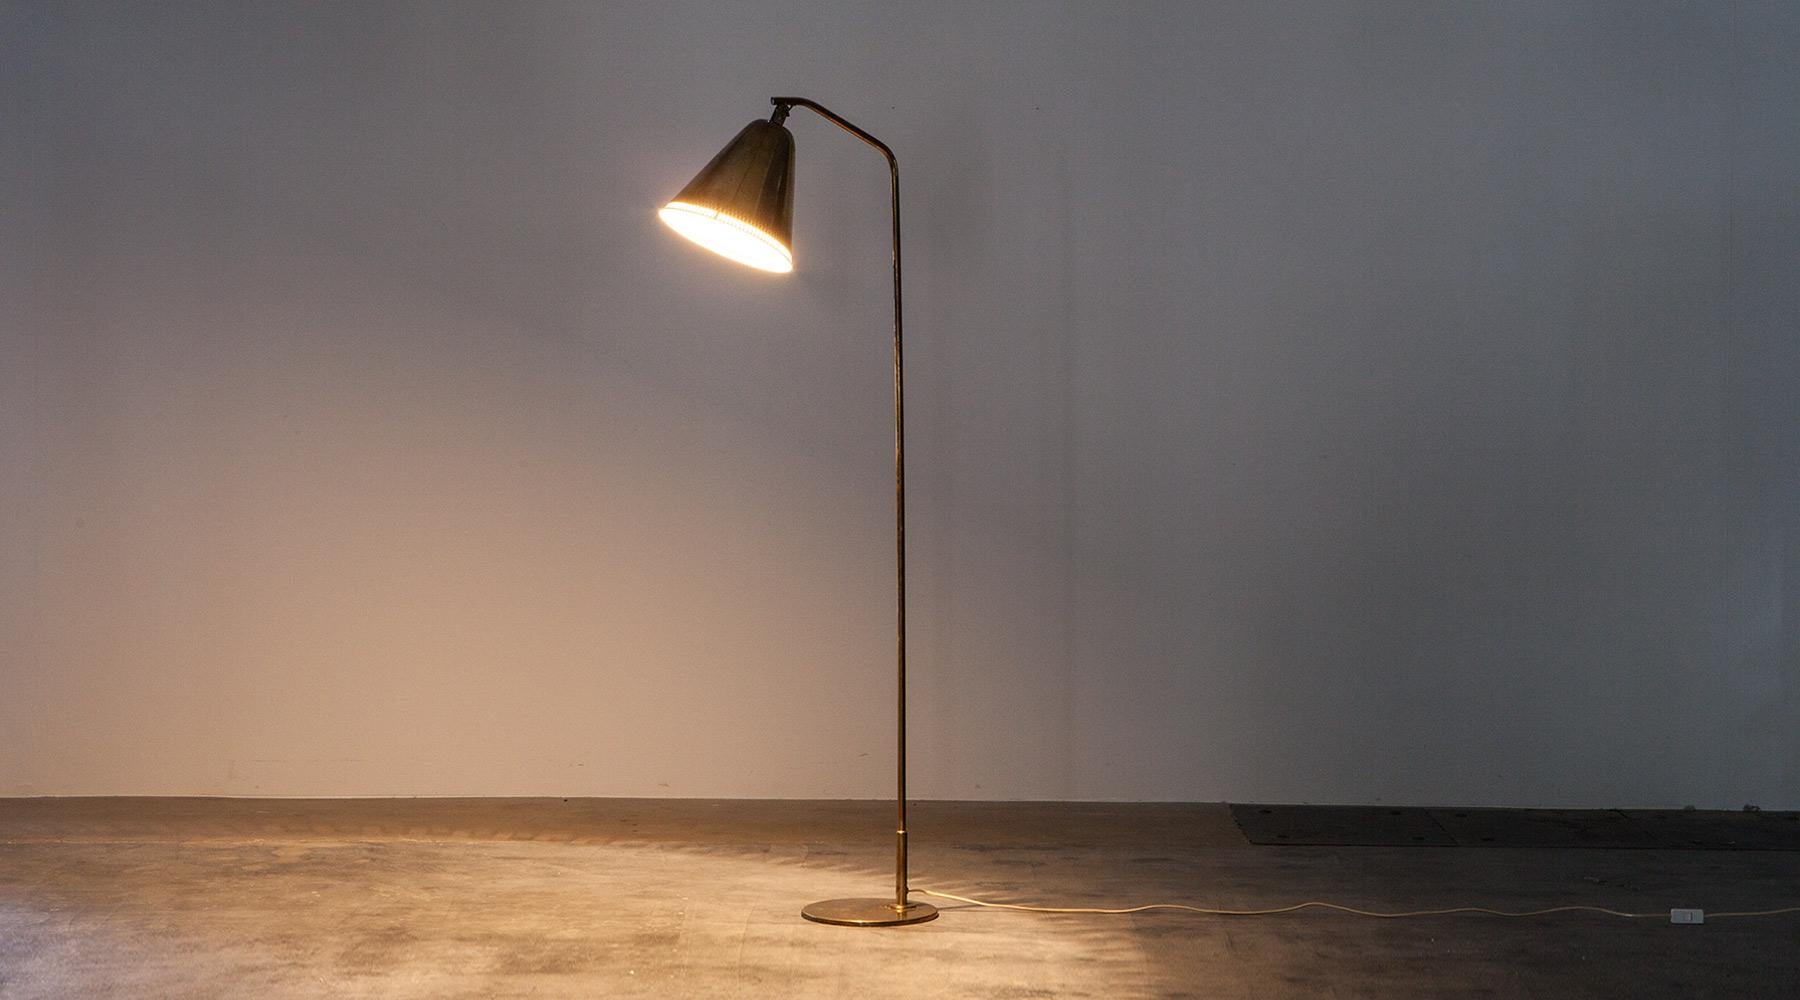 Brass floor lamp by Paavo Tynell, Finland, 1950.

Very elegant floor lamp designed by famous Finnish Paavo Tynell in brass, the shade is adjustable in all horizontal positions and is giving a warm charming light. Manufactured by Taito Oy.

Paavo